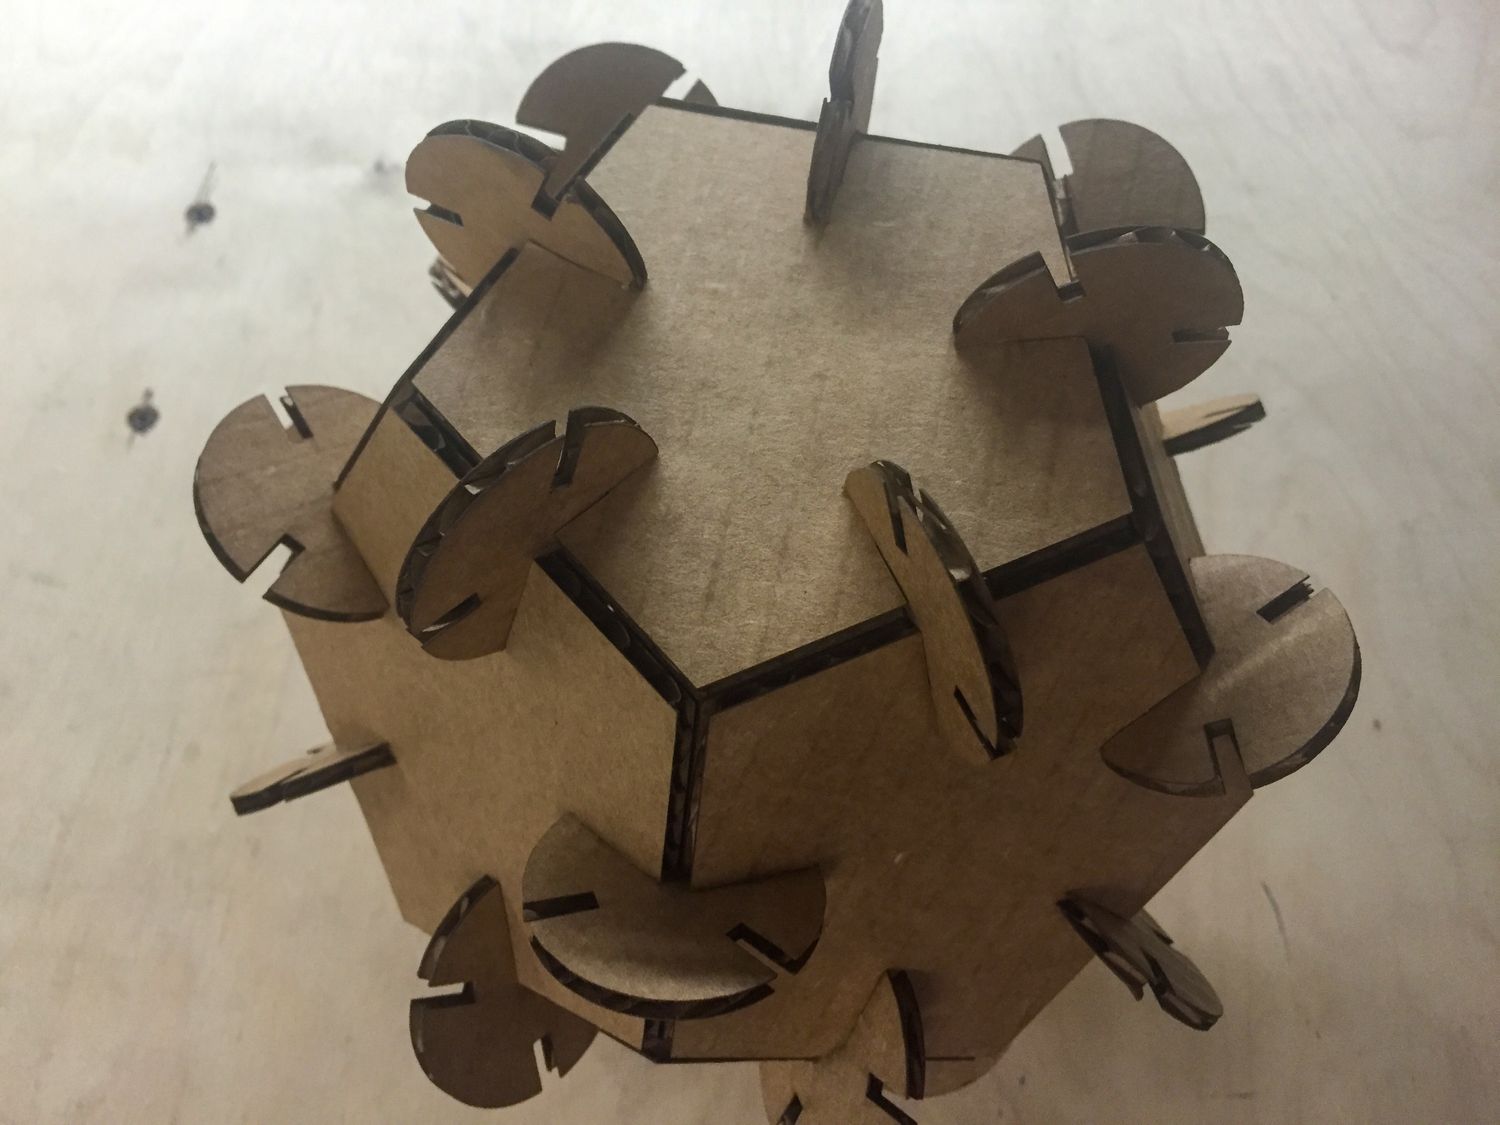 Cardboard dodecahedron on a wooden background